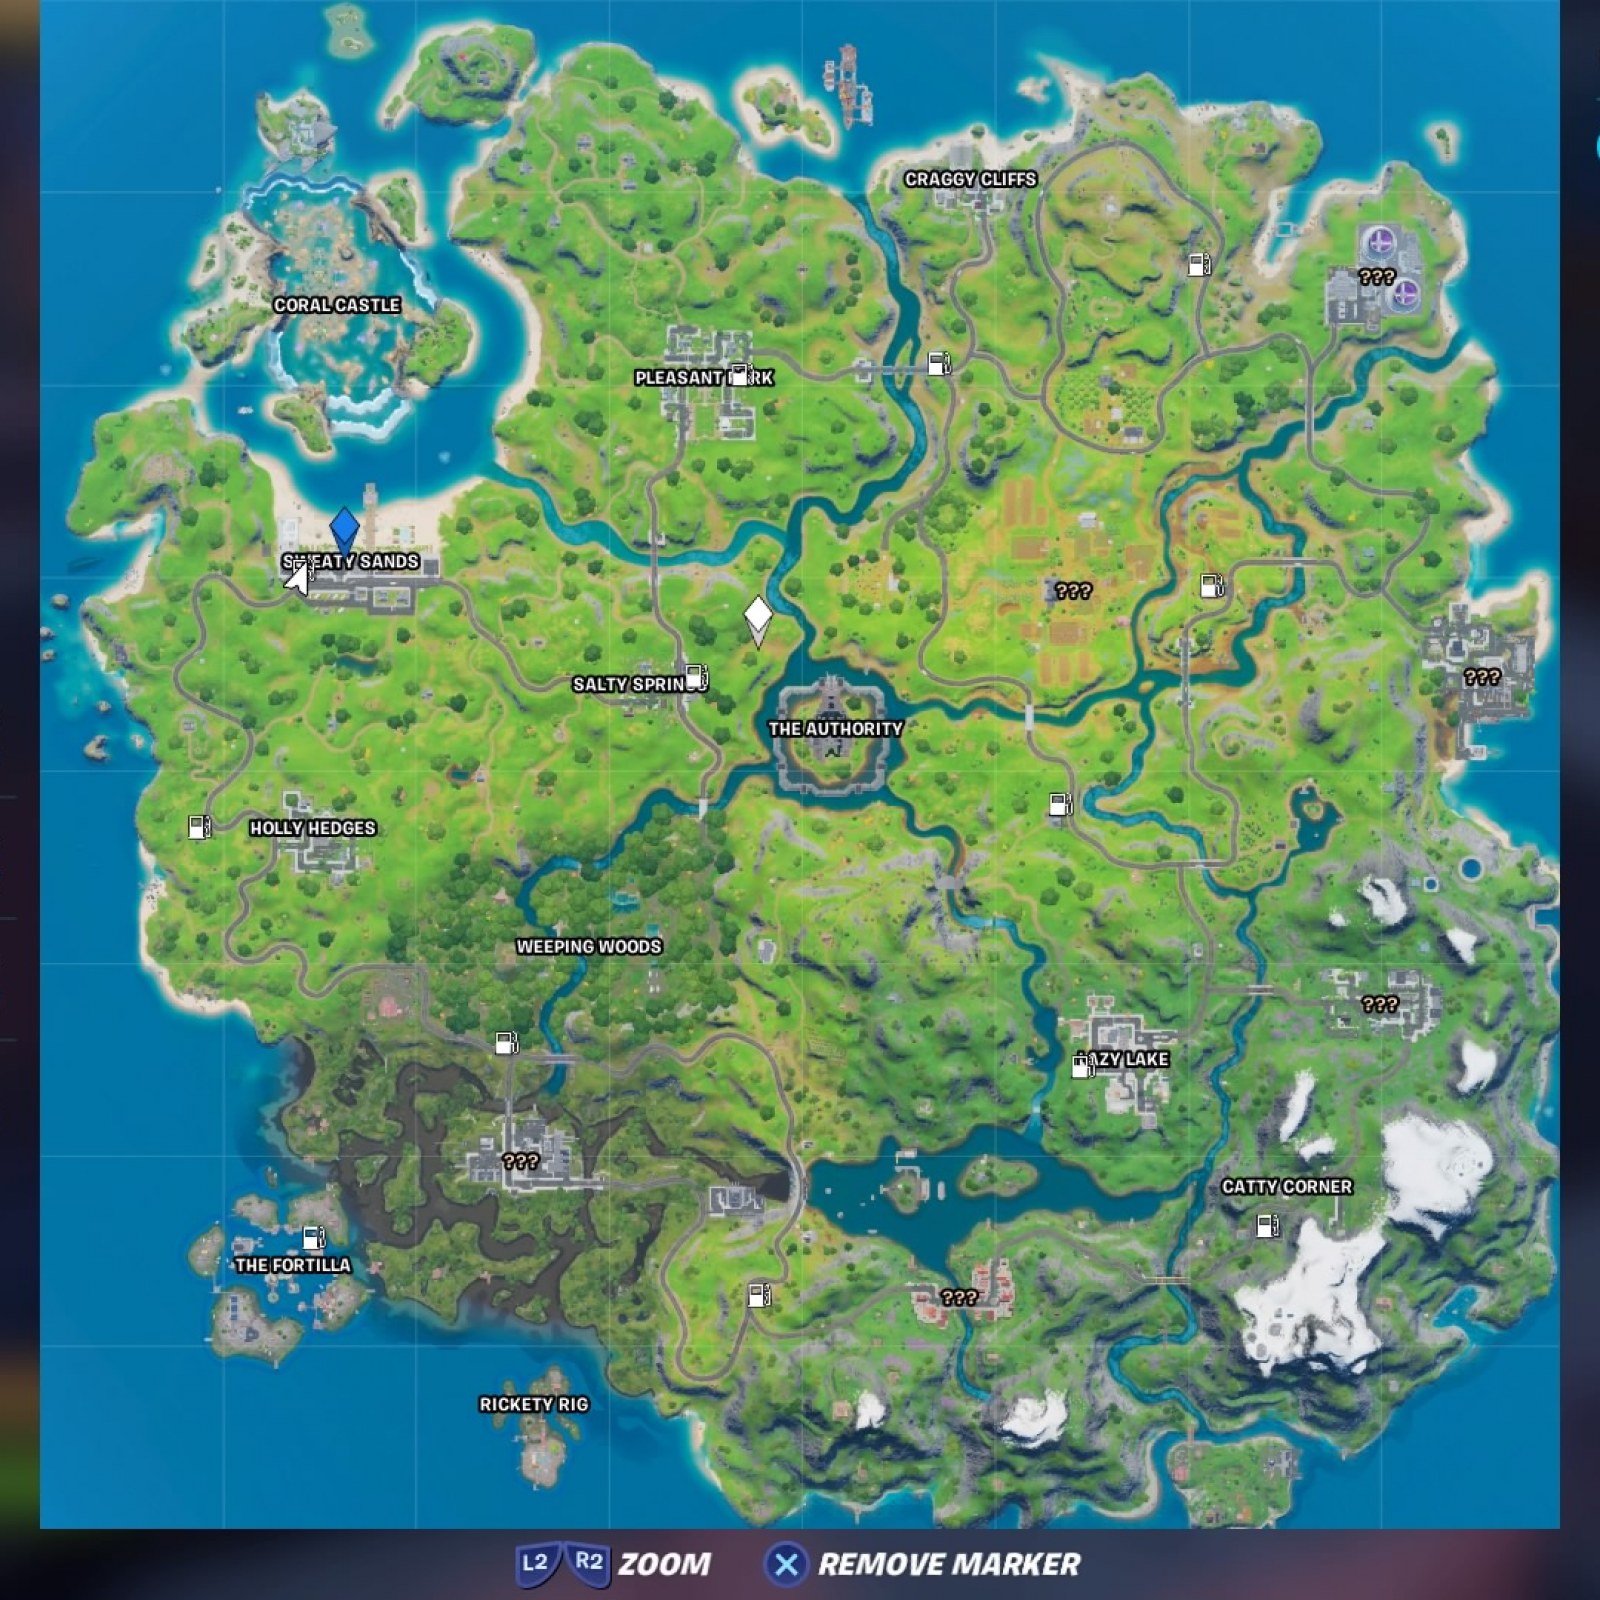 Fortnite Locations Today Fortnite Cars Guide Locations How To Gas Up Where To Find Gas Cans